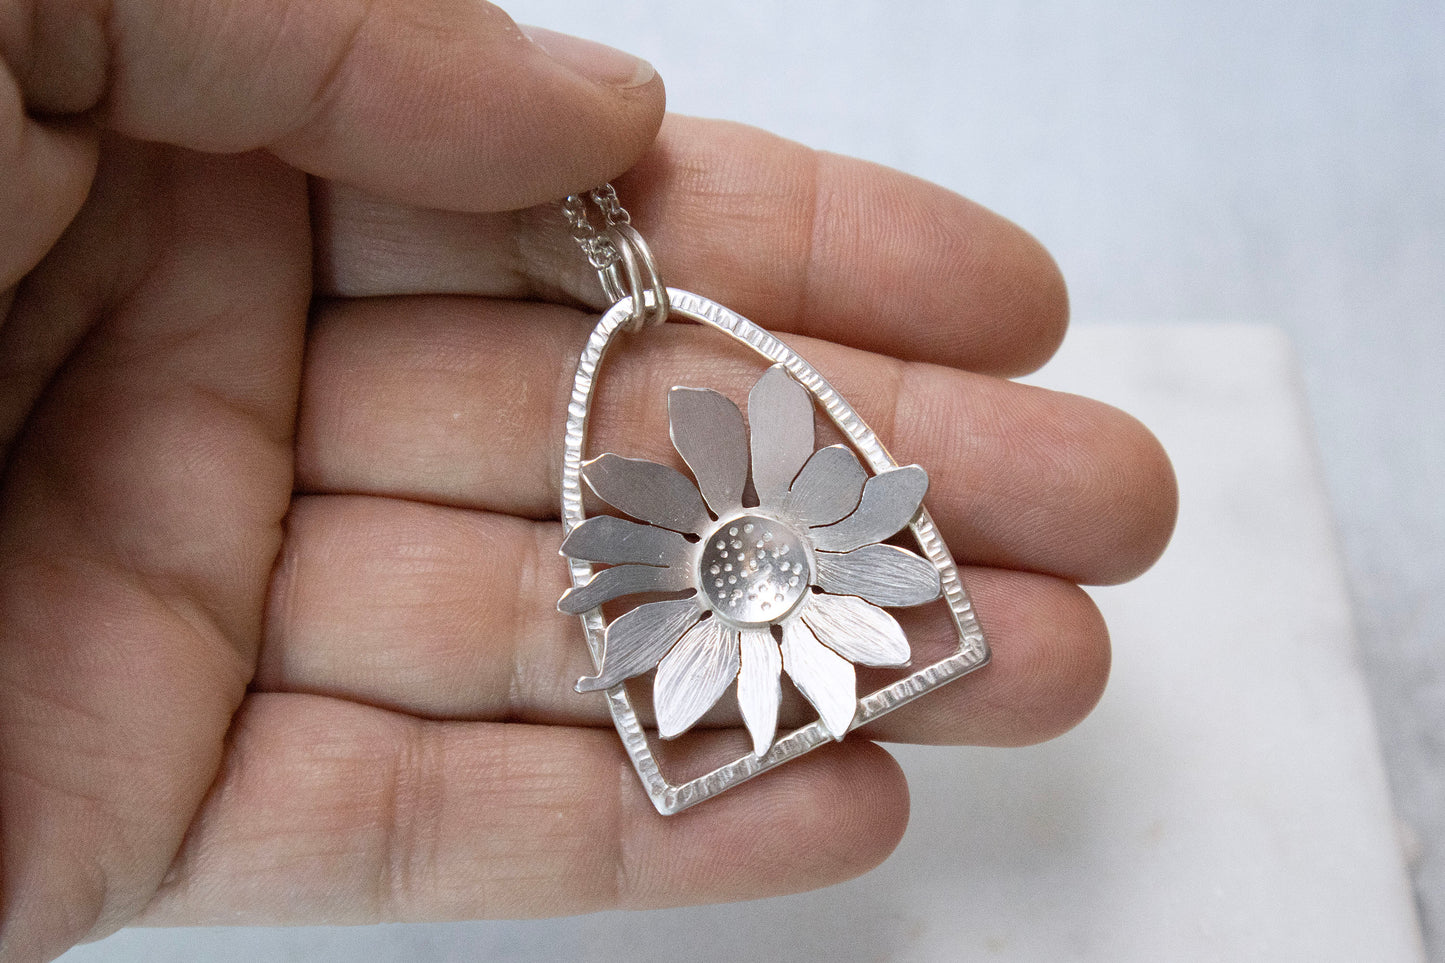 Spirit Necklace with Balsamroot Flower in Sterling Silver